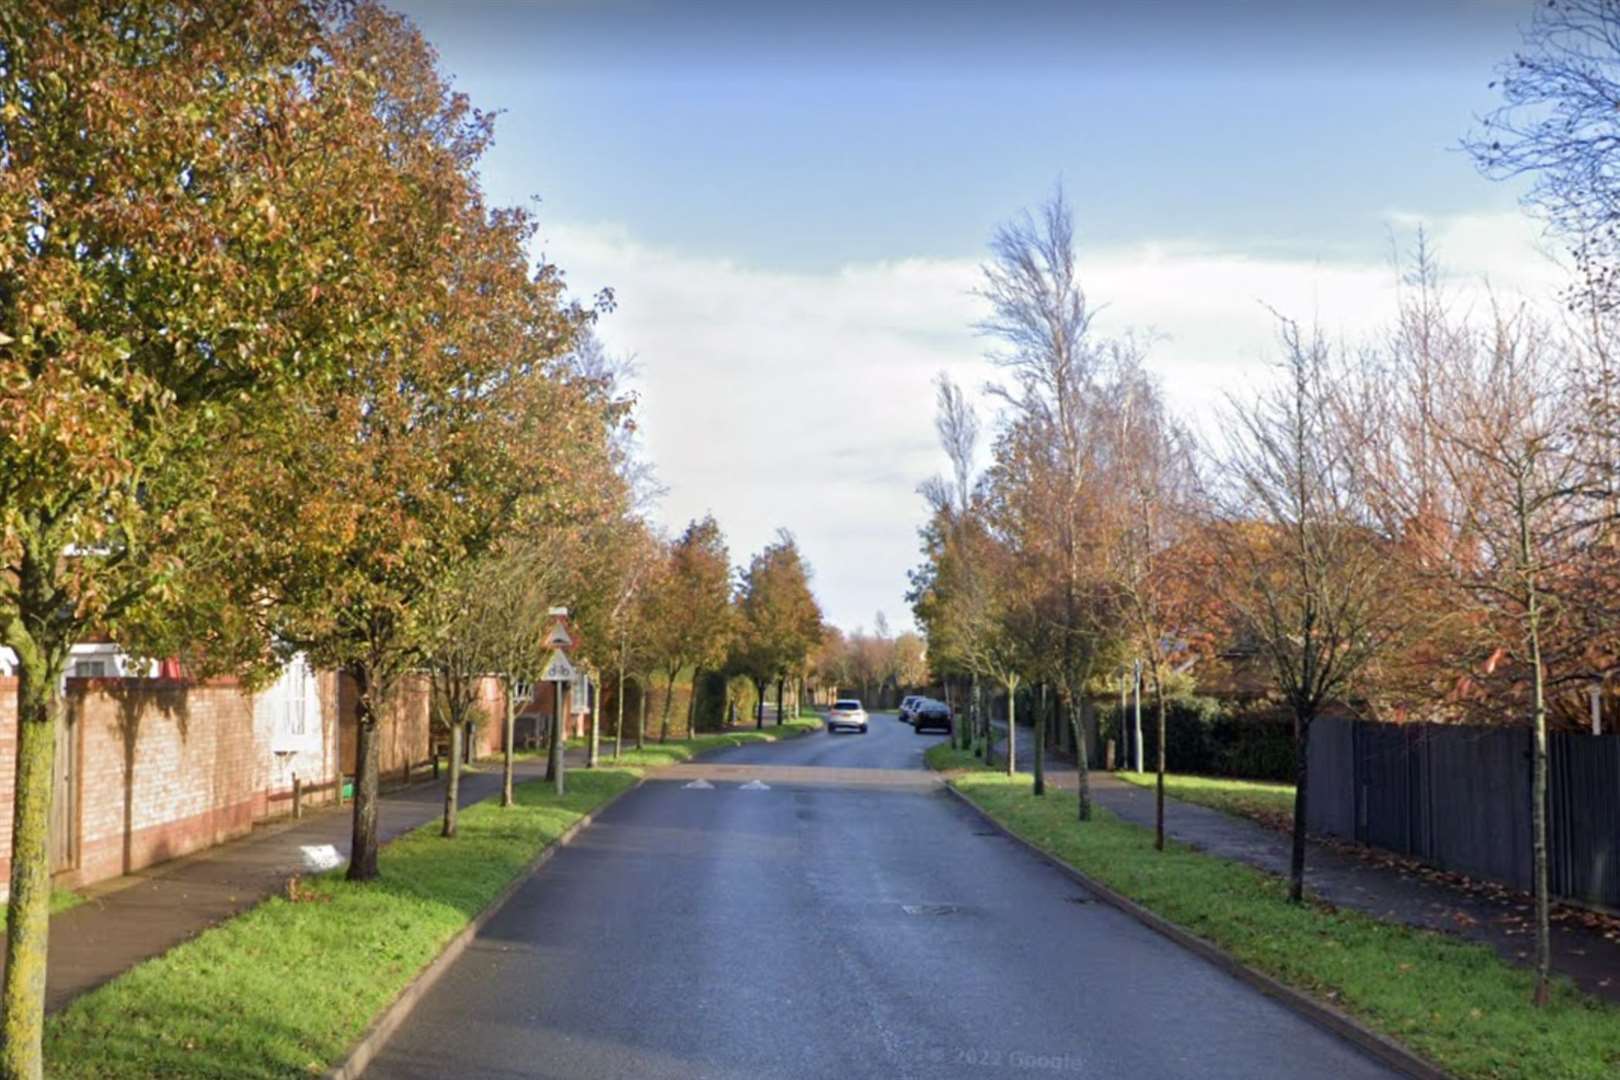 A man was found with stab wounds in Page Road, Hawkinge. Picture: Google